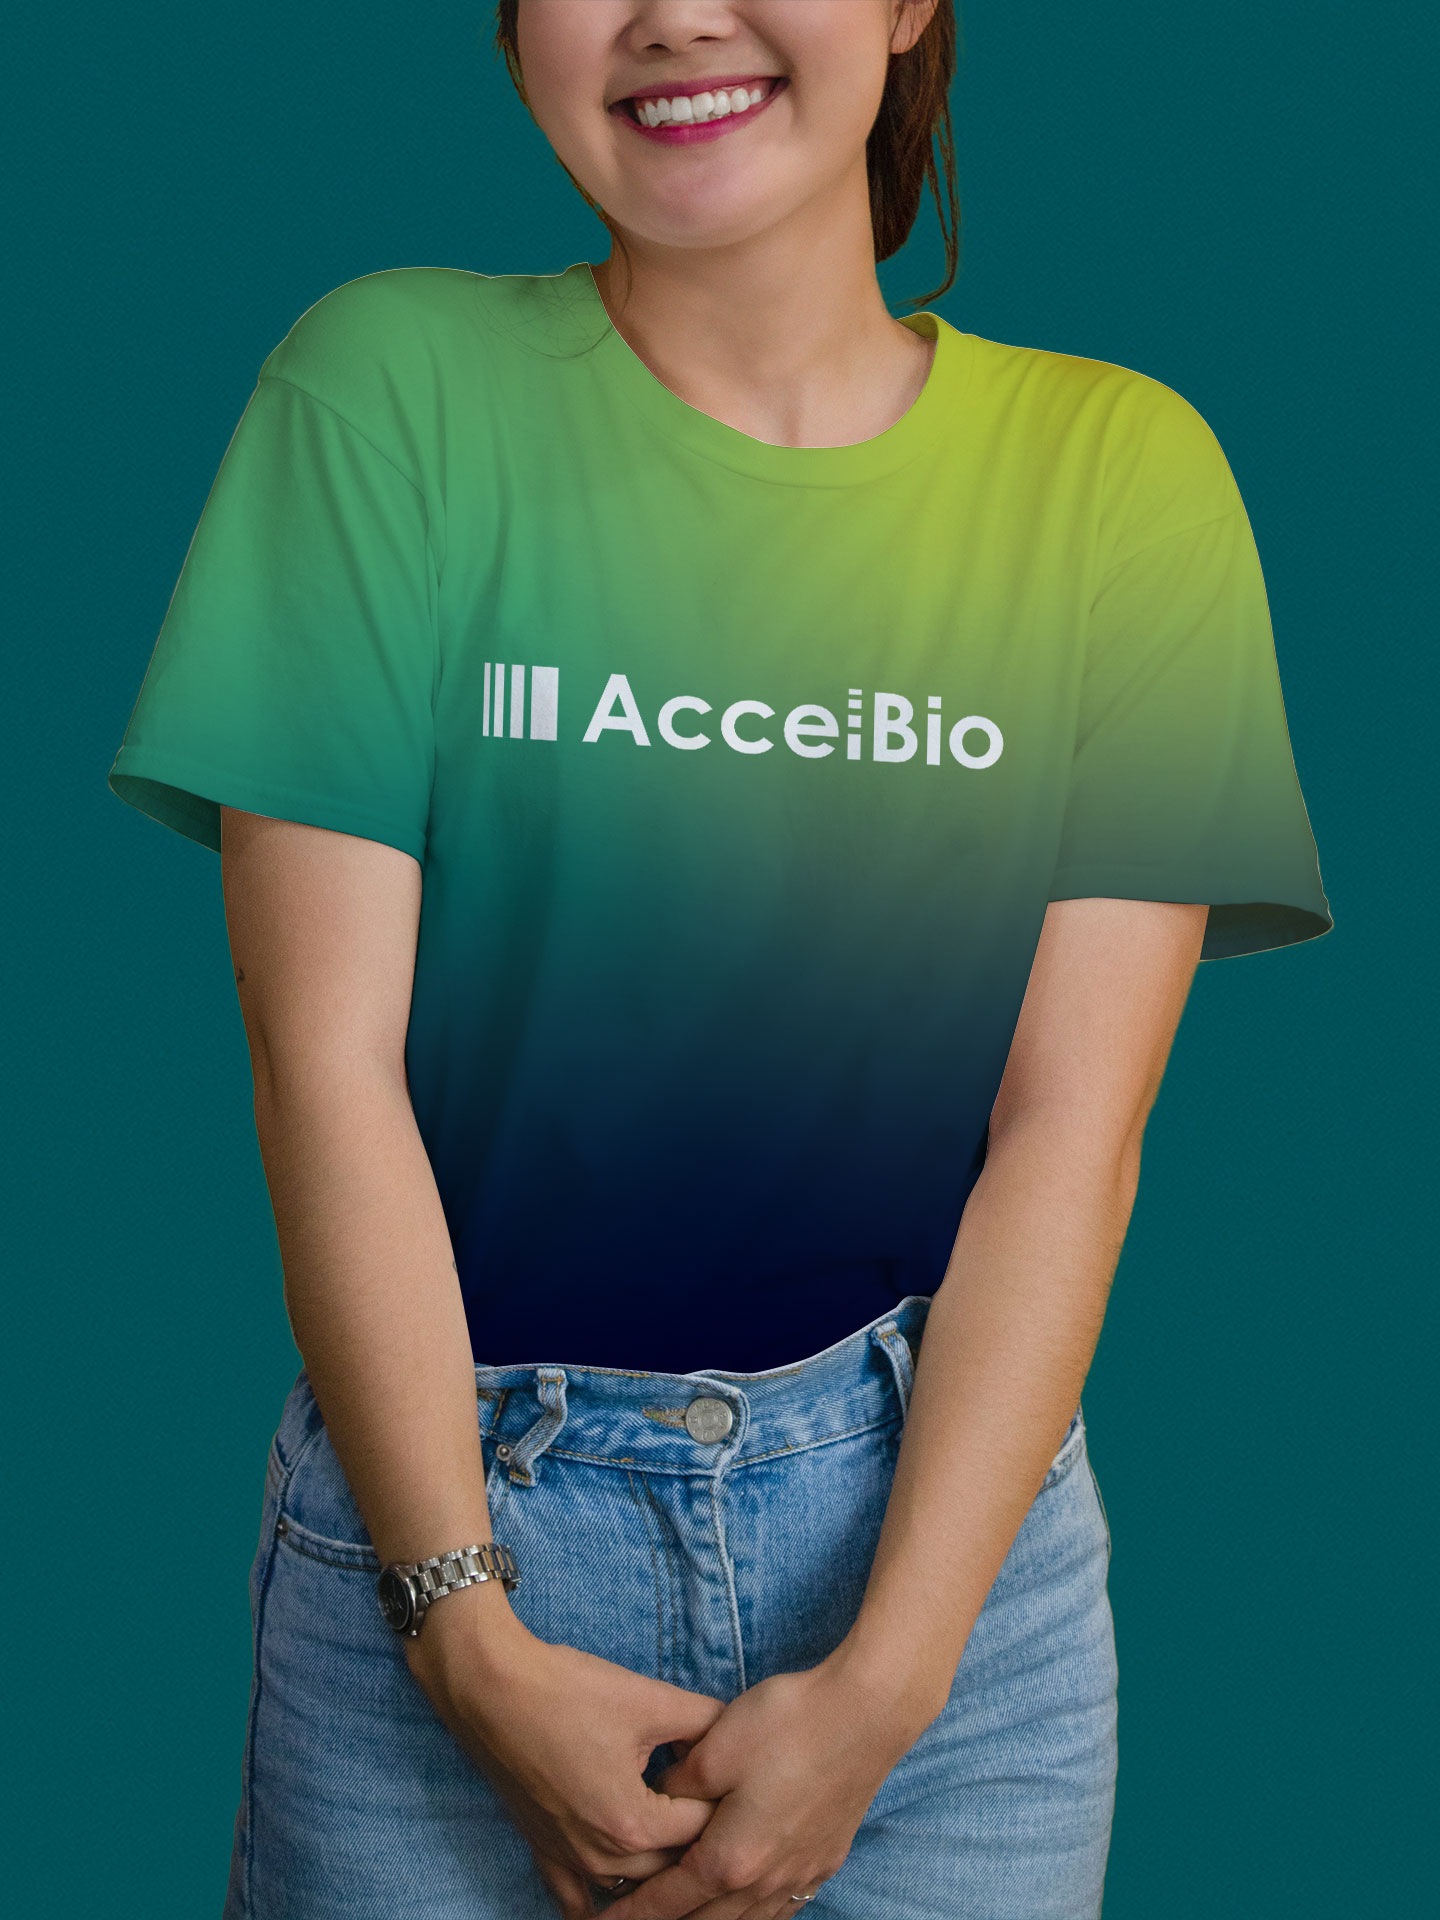 iMM - AccelBio - T-shirt